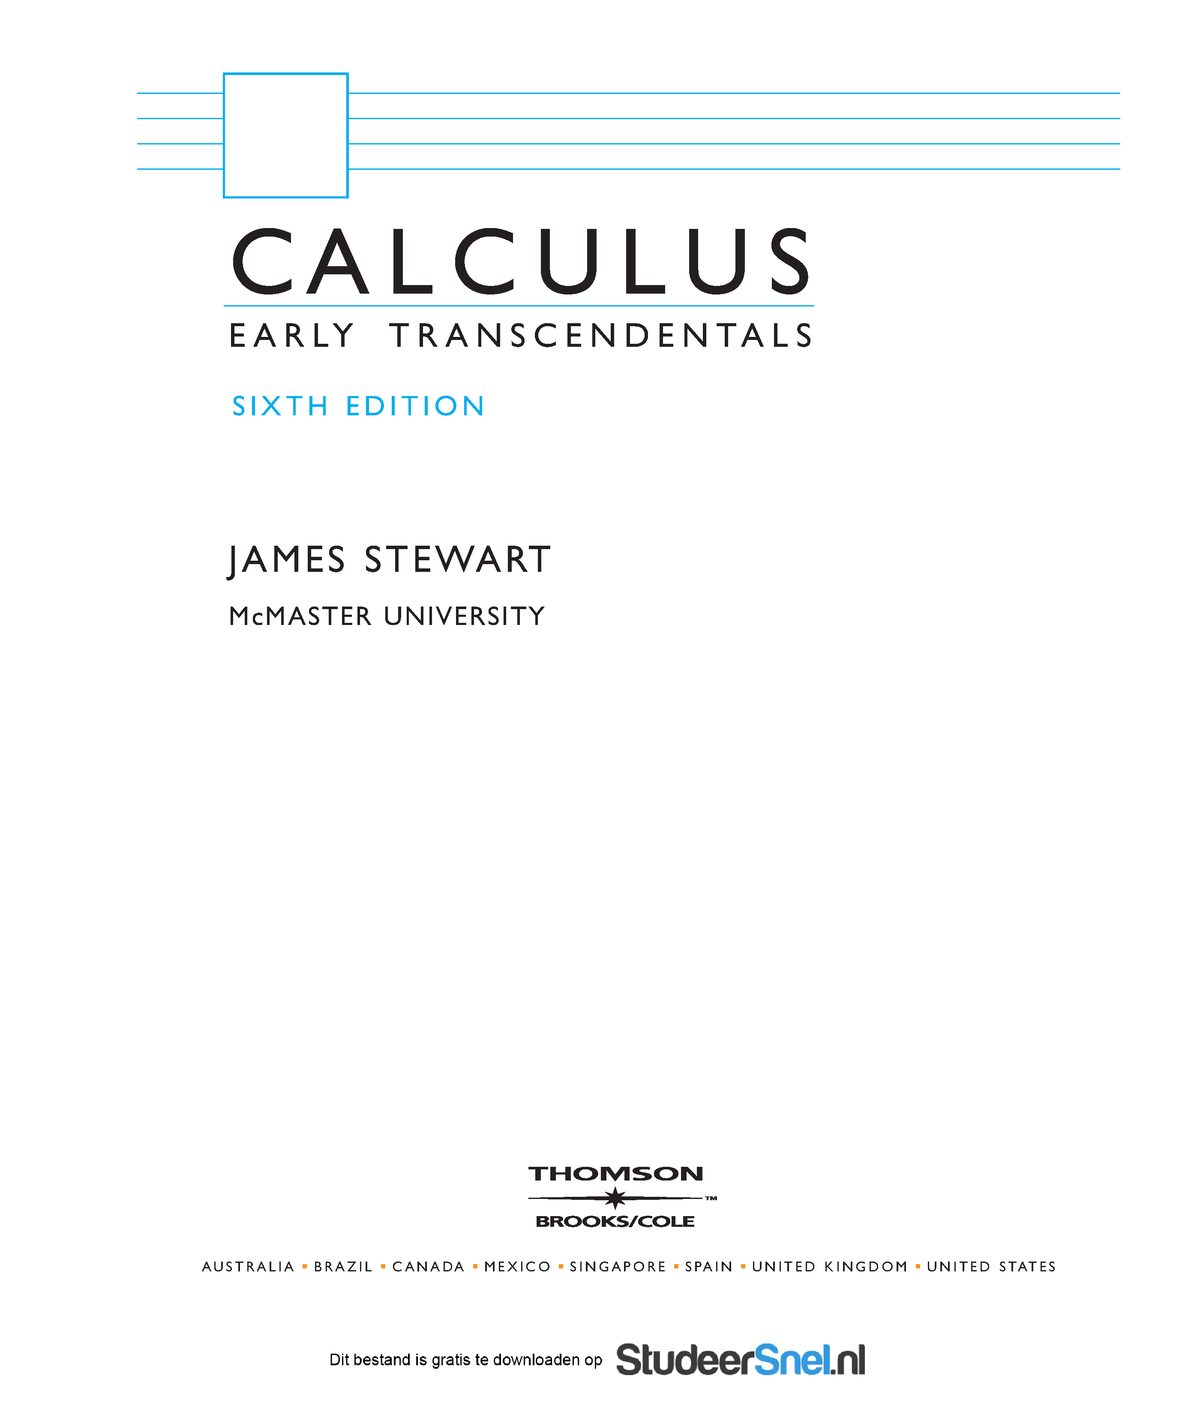 calculus early transcendentals 8th edition quiz